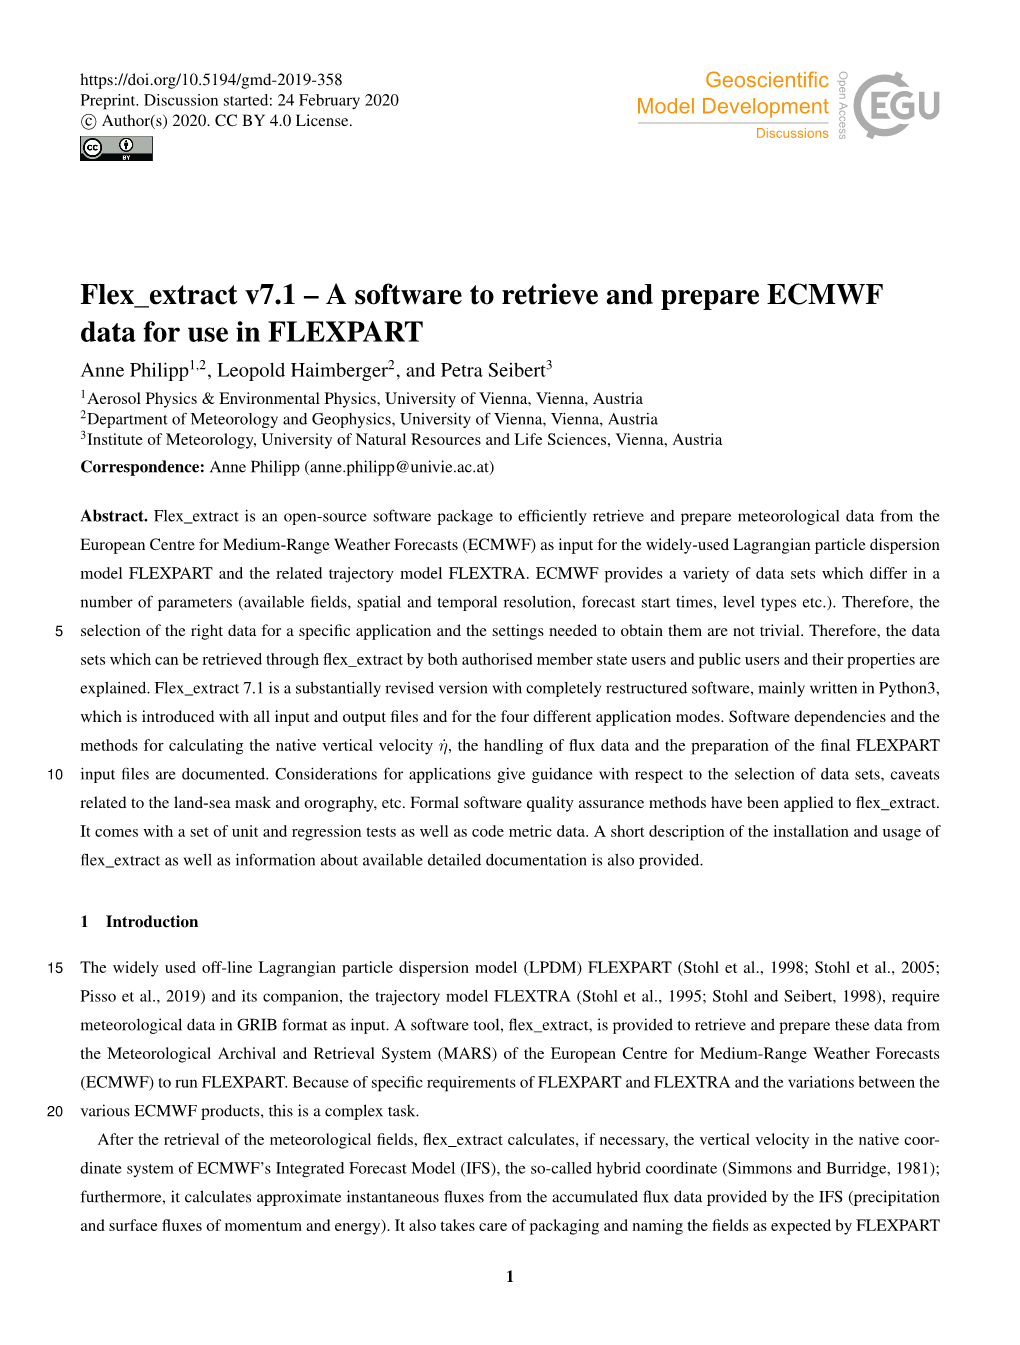 A Software to Retrieve and Prepare ECMWF Data for Use in FLEXPART